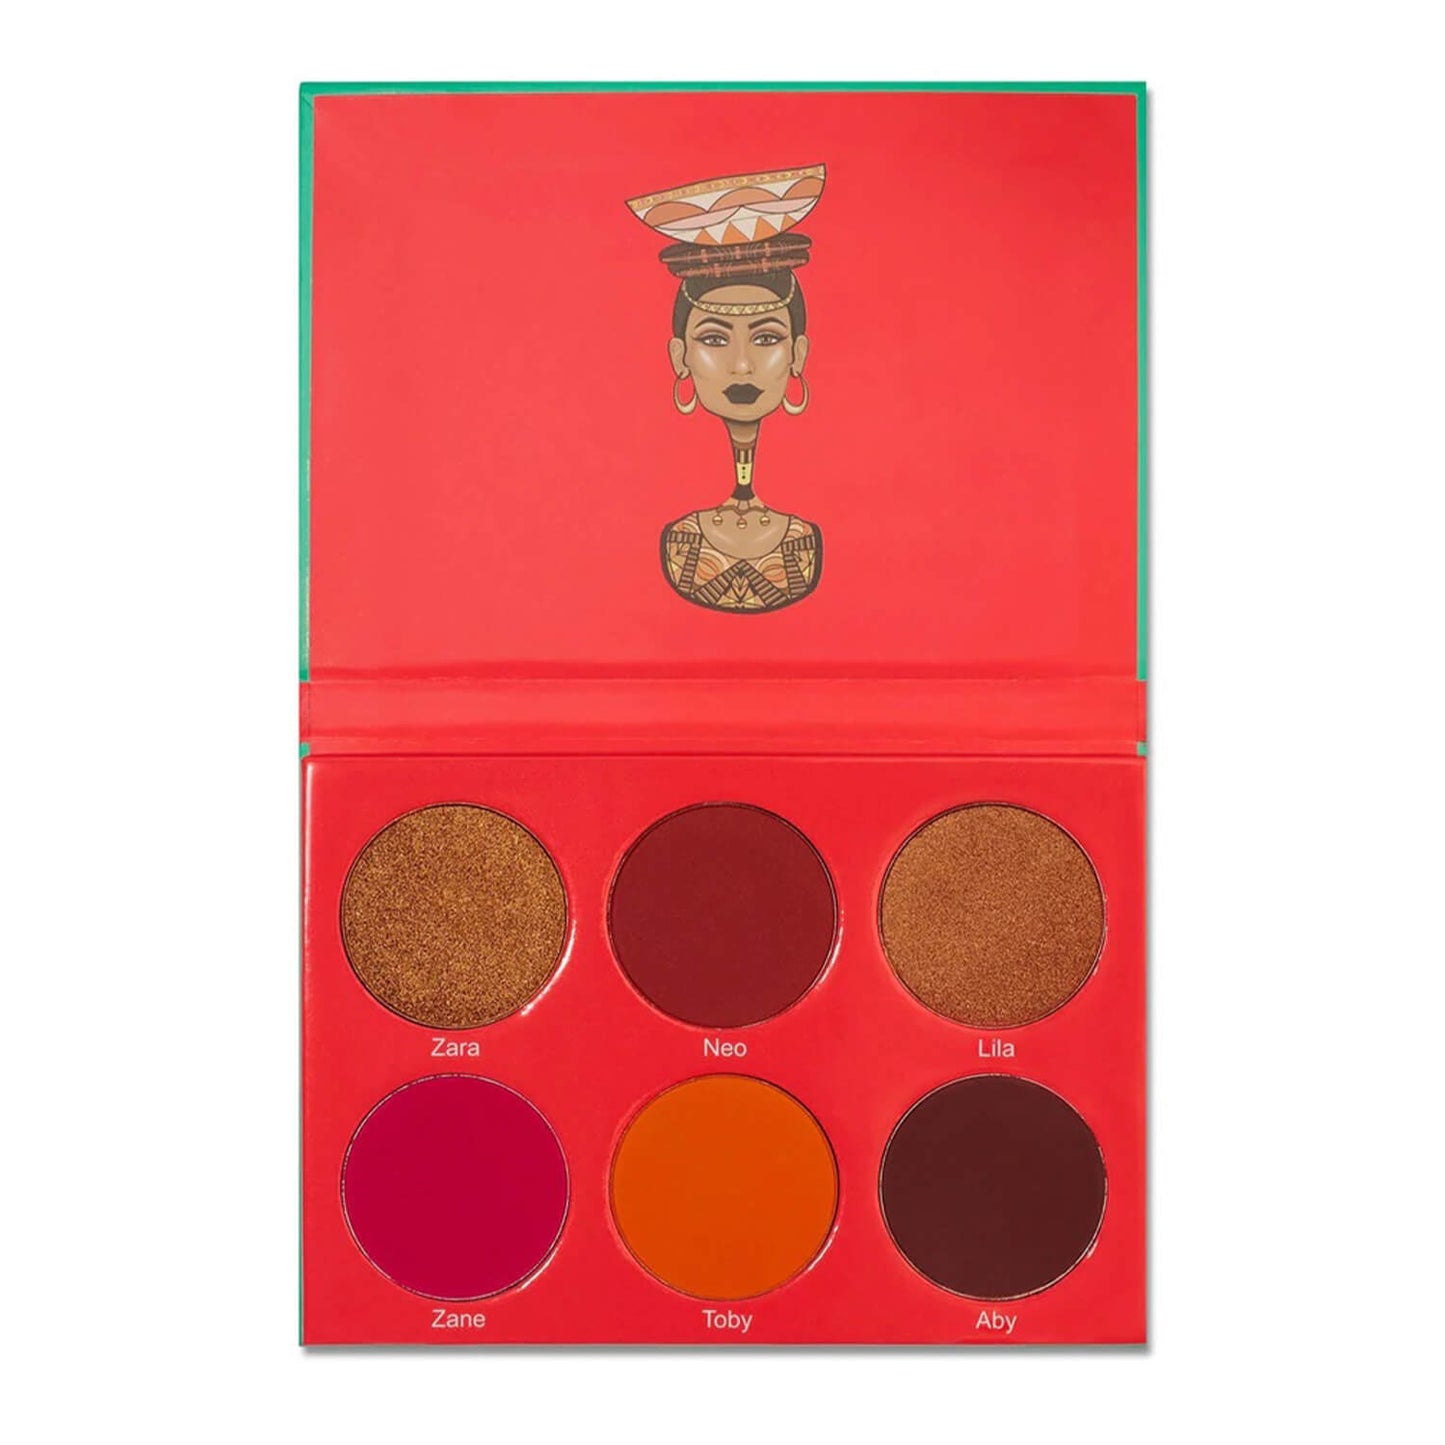 juvias saharan blush palette volume 1 available at heygirl.pk for delivery in Pakistan